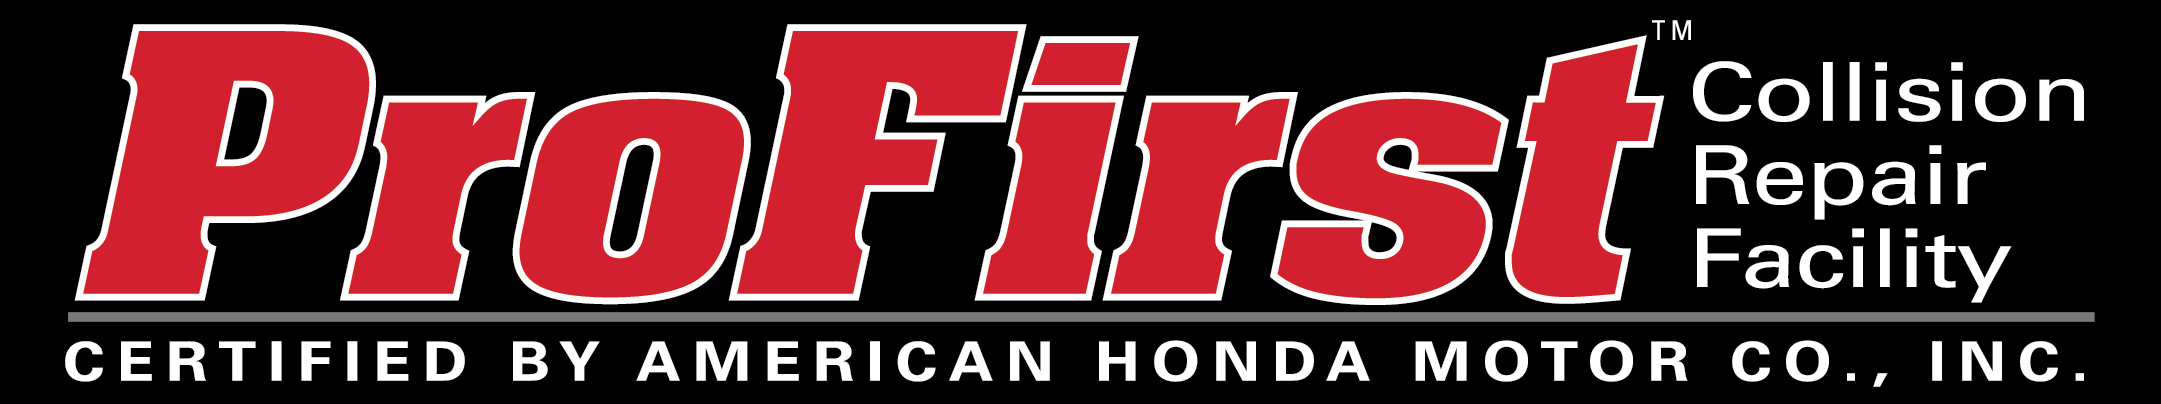 Pro First Collision Repair Facility. Certified by American Honda Motor Co., INC. 